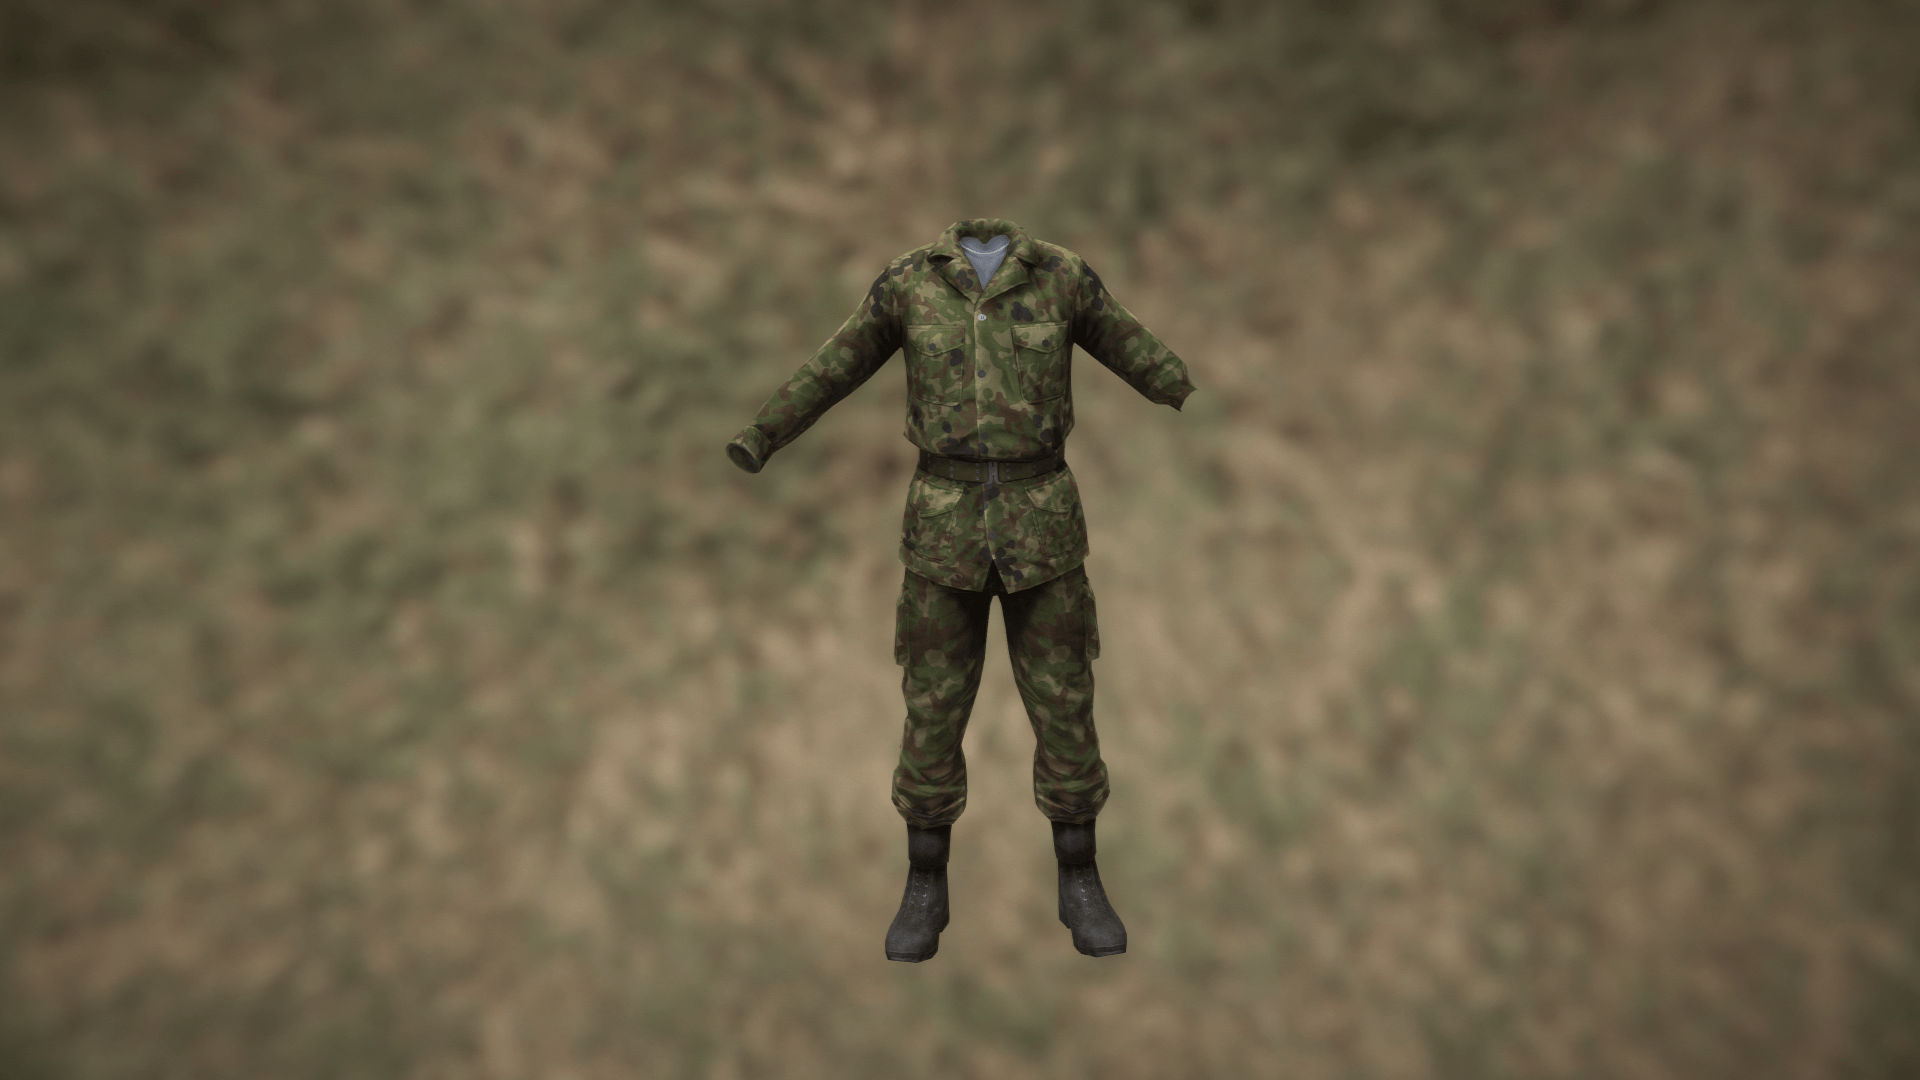 Flecktarn re texture for military fatigues? 4 Mod Requests